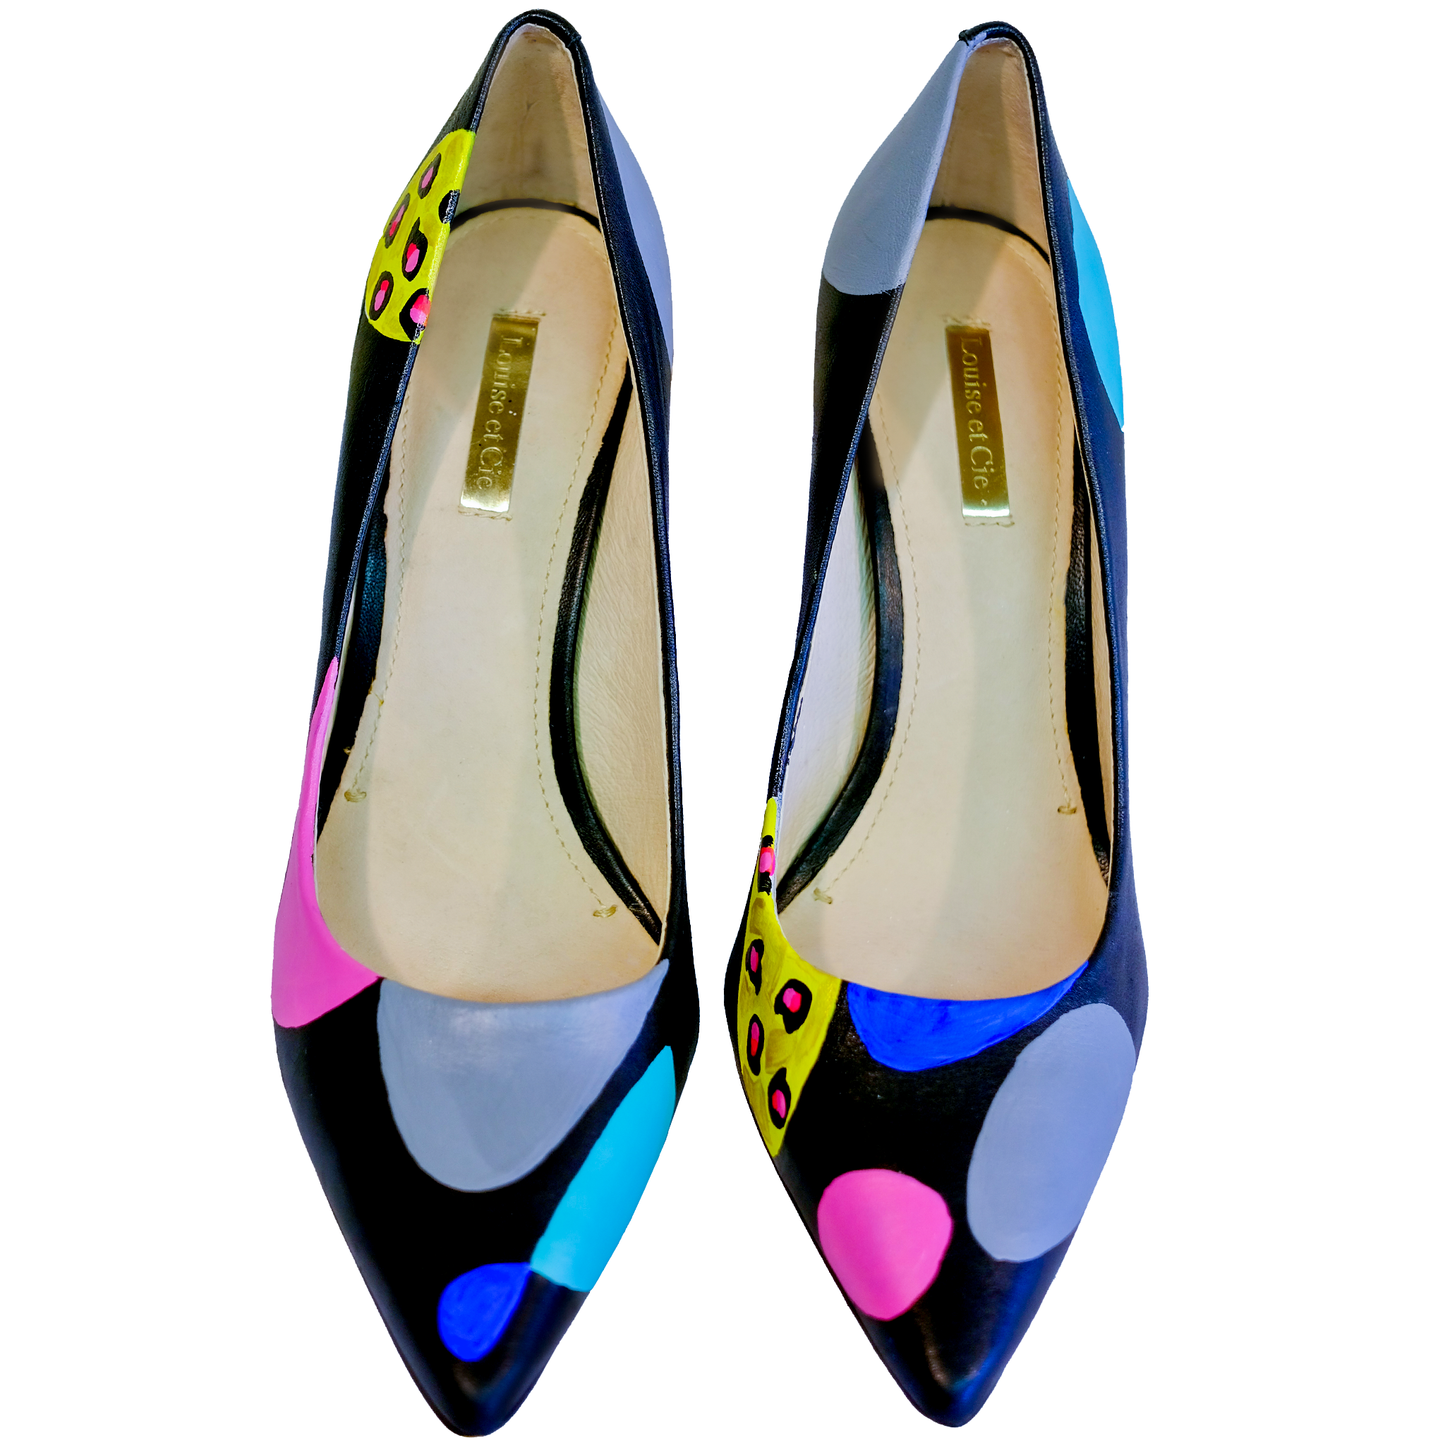 Modern Art - Louise Et Cie Pumps - Size 10 - Hand Painted by Matthew Phipps Hines